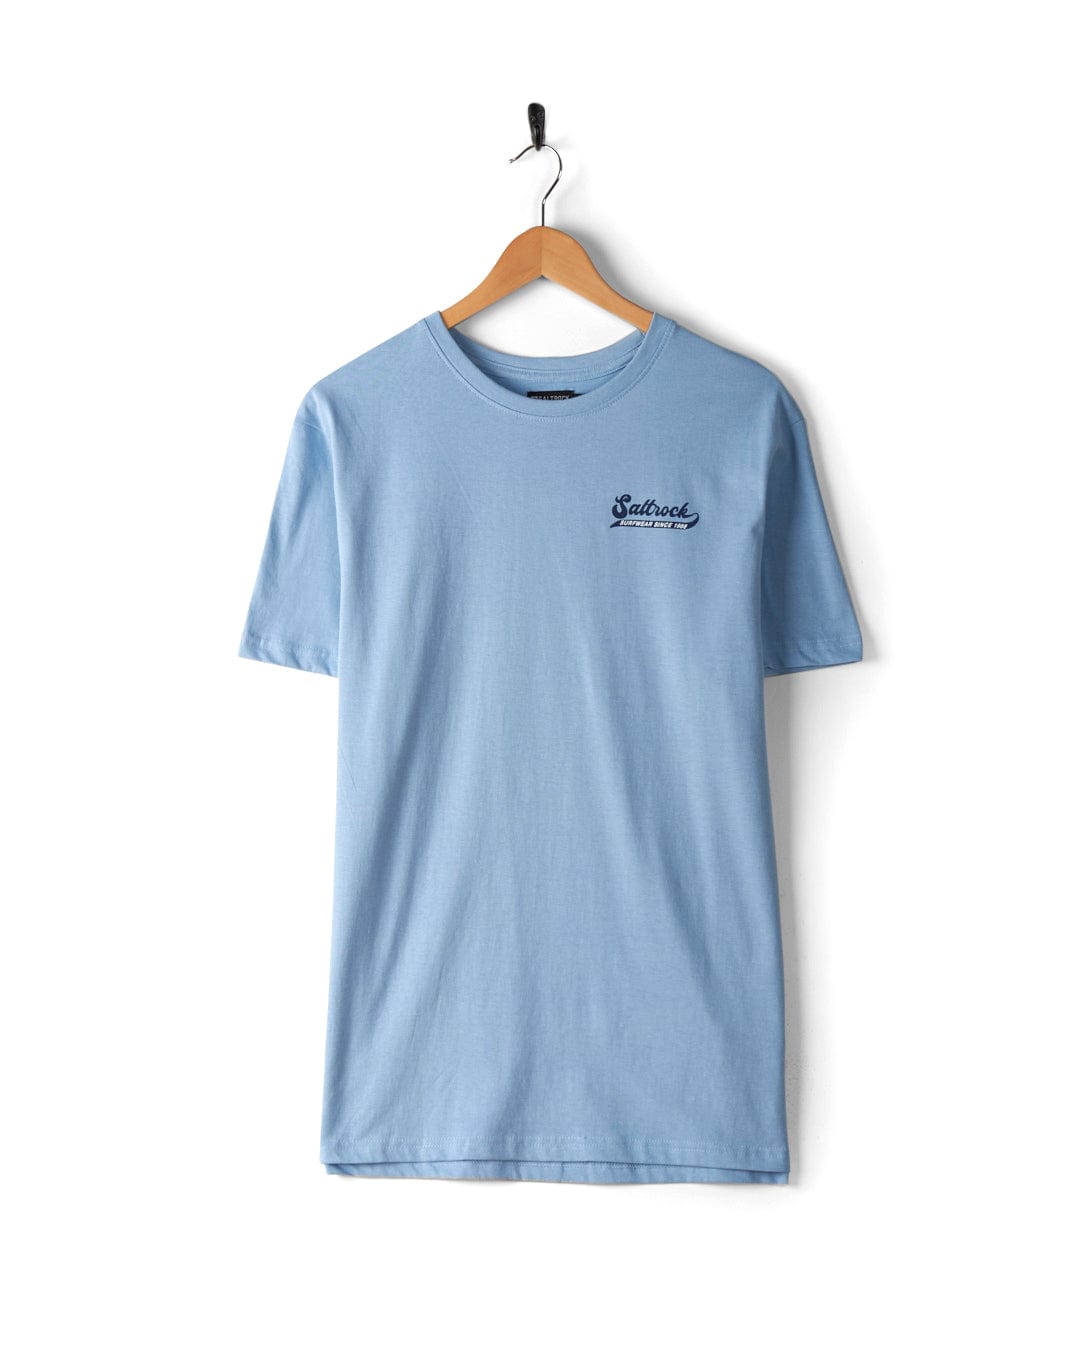 A Home Run - Mens T-Shirt - Blue with a small Saltrock branded logo on the left chest hangs on a wooden hanger against a white wall.